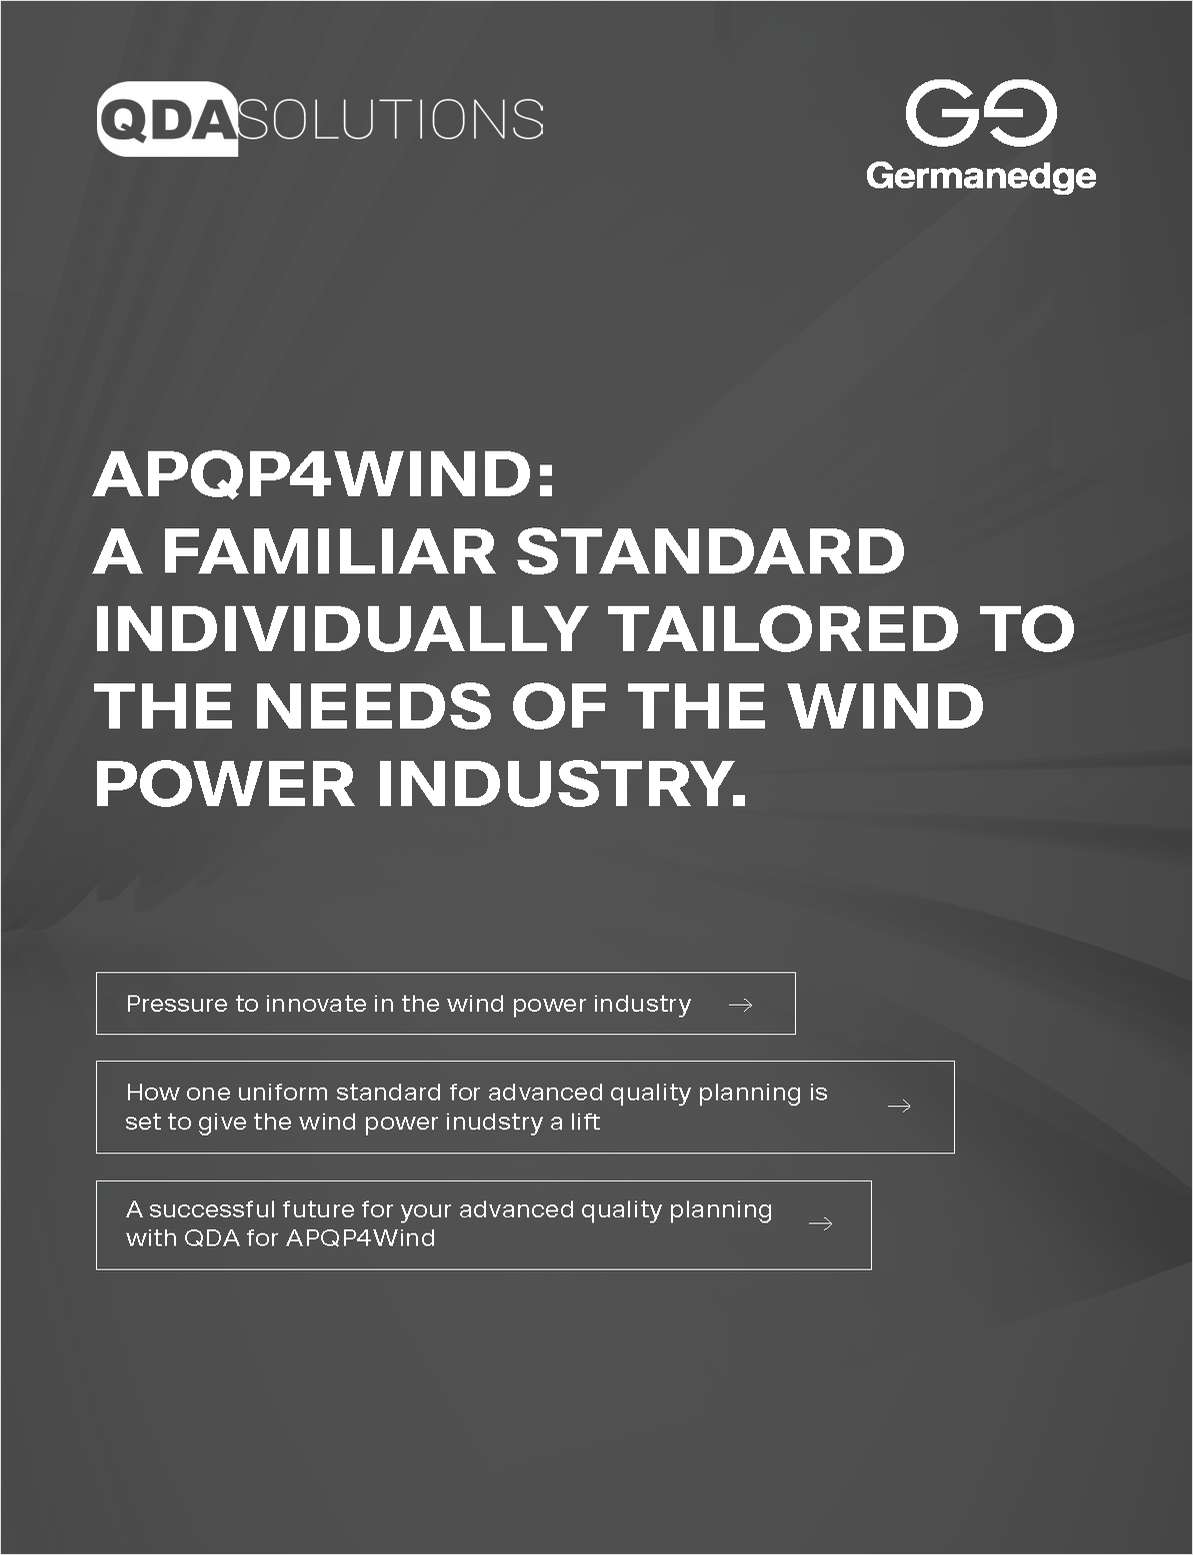 APQP4Wind standard is revolutionizing the wind industry